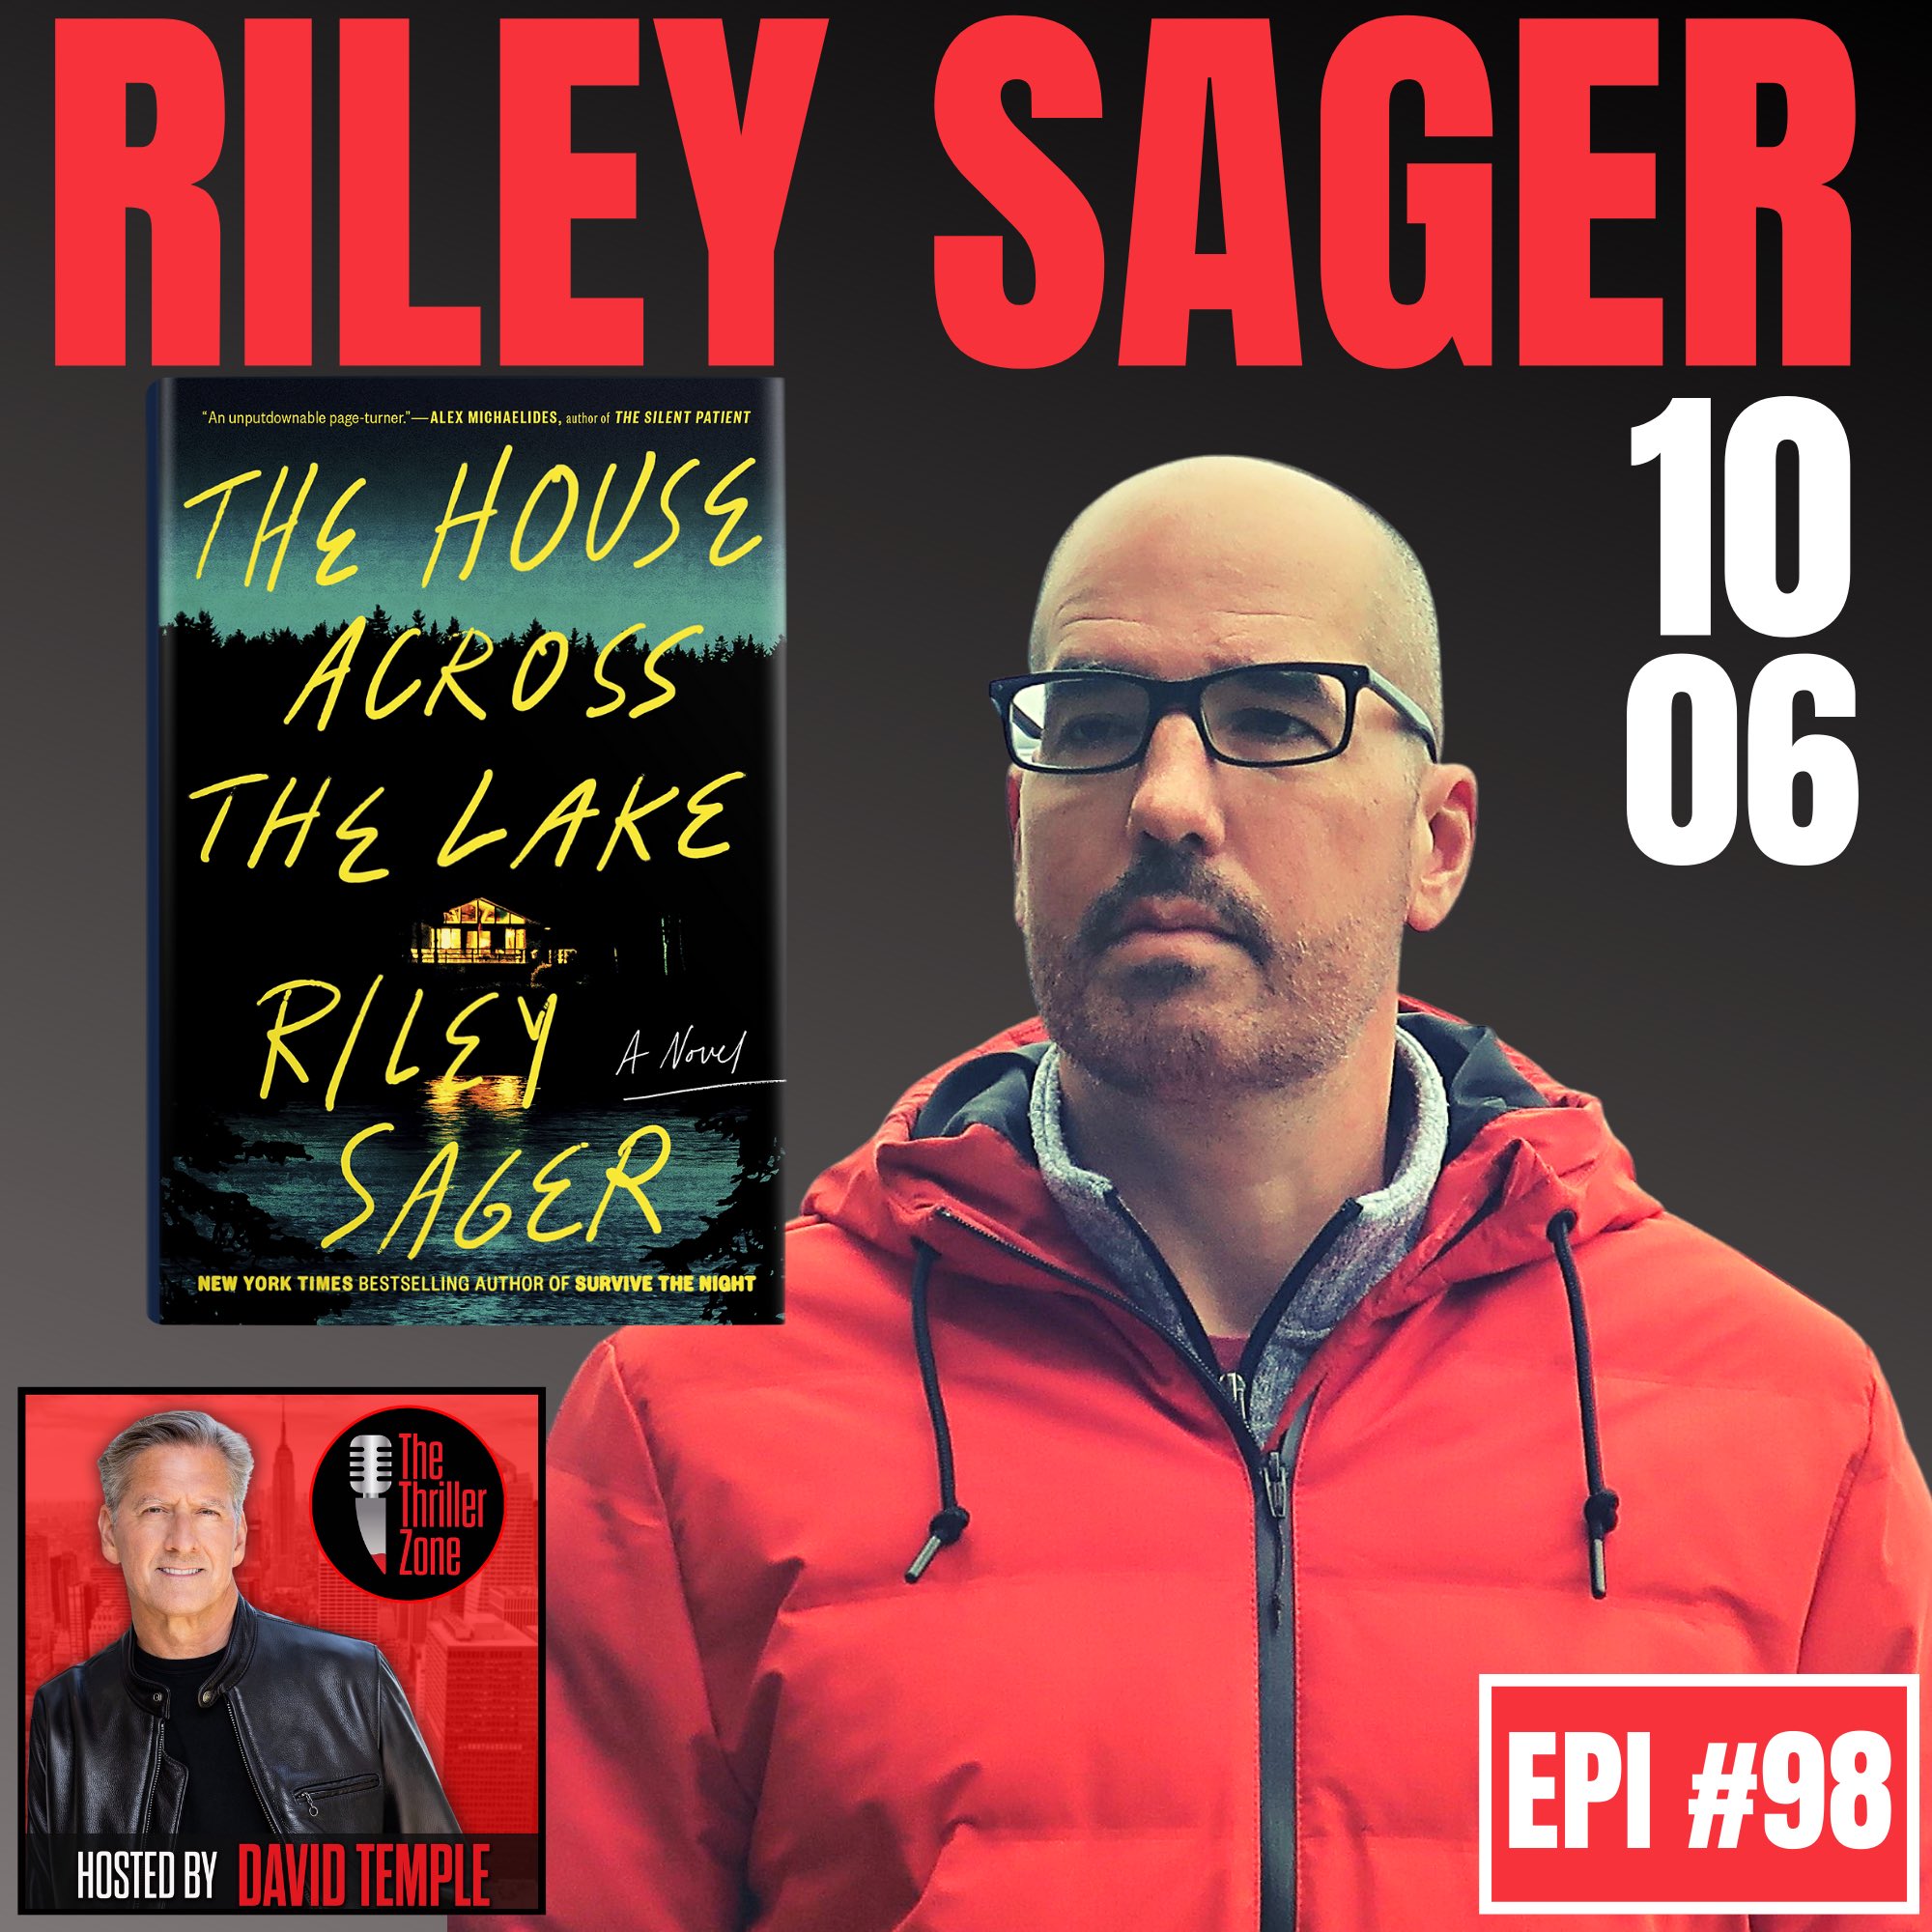 Riley Sager, author of The House Across The Lake Image